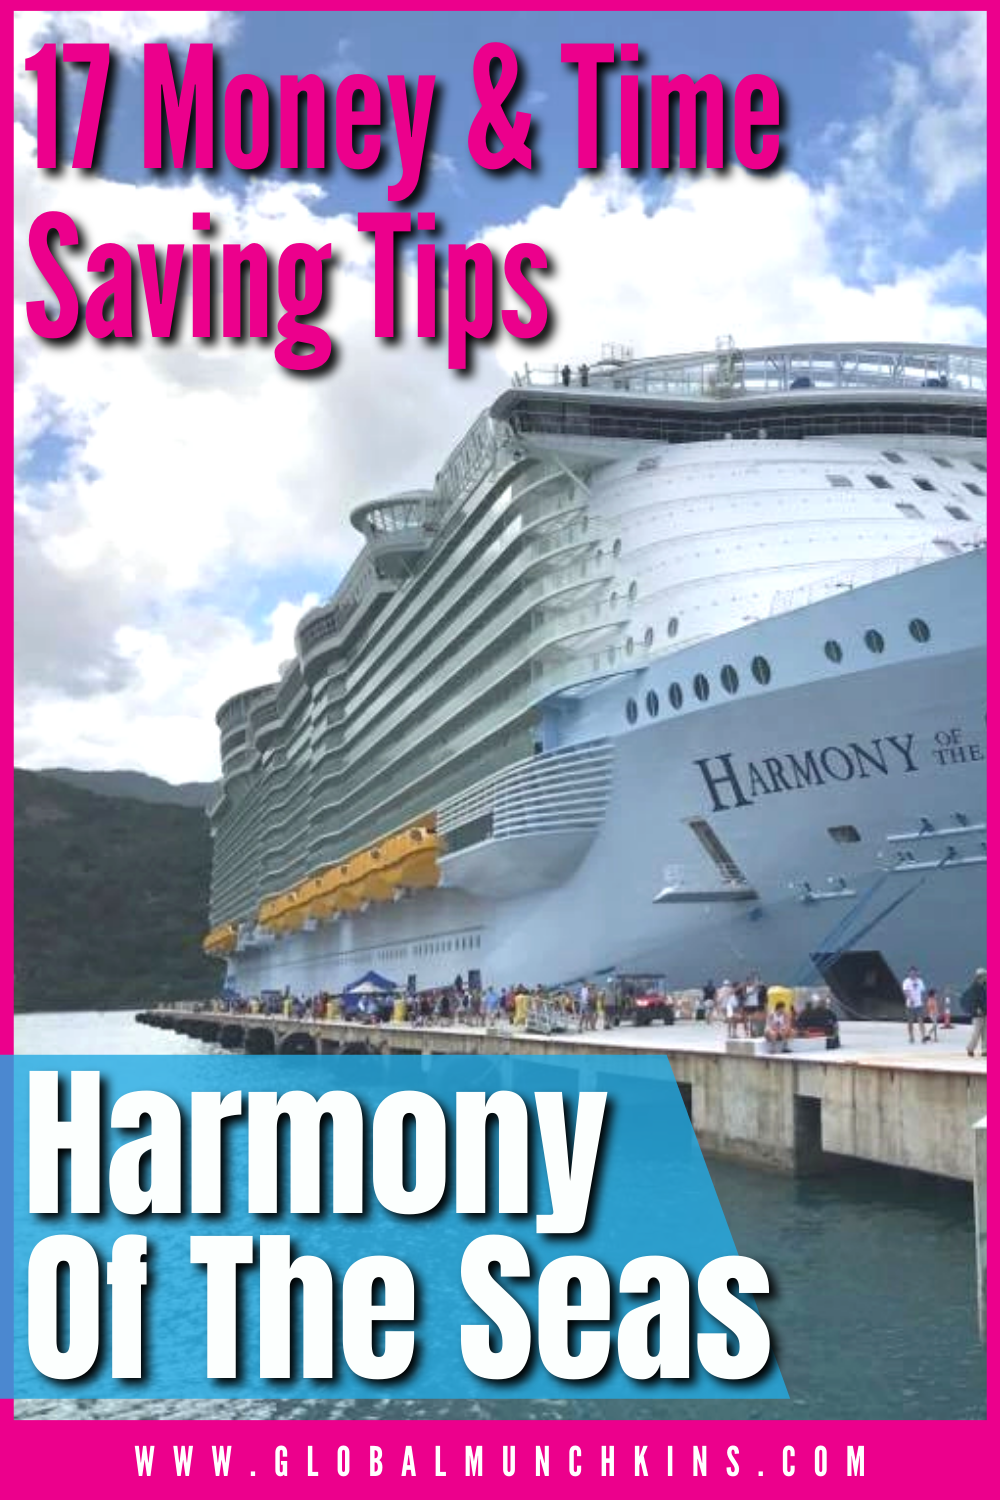 Everything you need to know about Royal Caribbean’s NEWEST & LARGEST ship including our Harmony of the Seas itinerary, a peek inside the Harmony of the Seas cabins, things to do on the ship, dining options, kids club & more! Get ready to have fun because the Harmony of the Seas ship is the most incredible ship we have ever been on. 